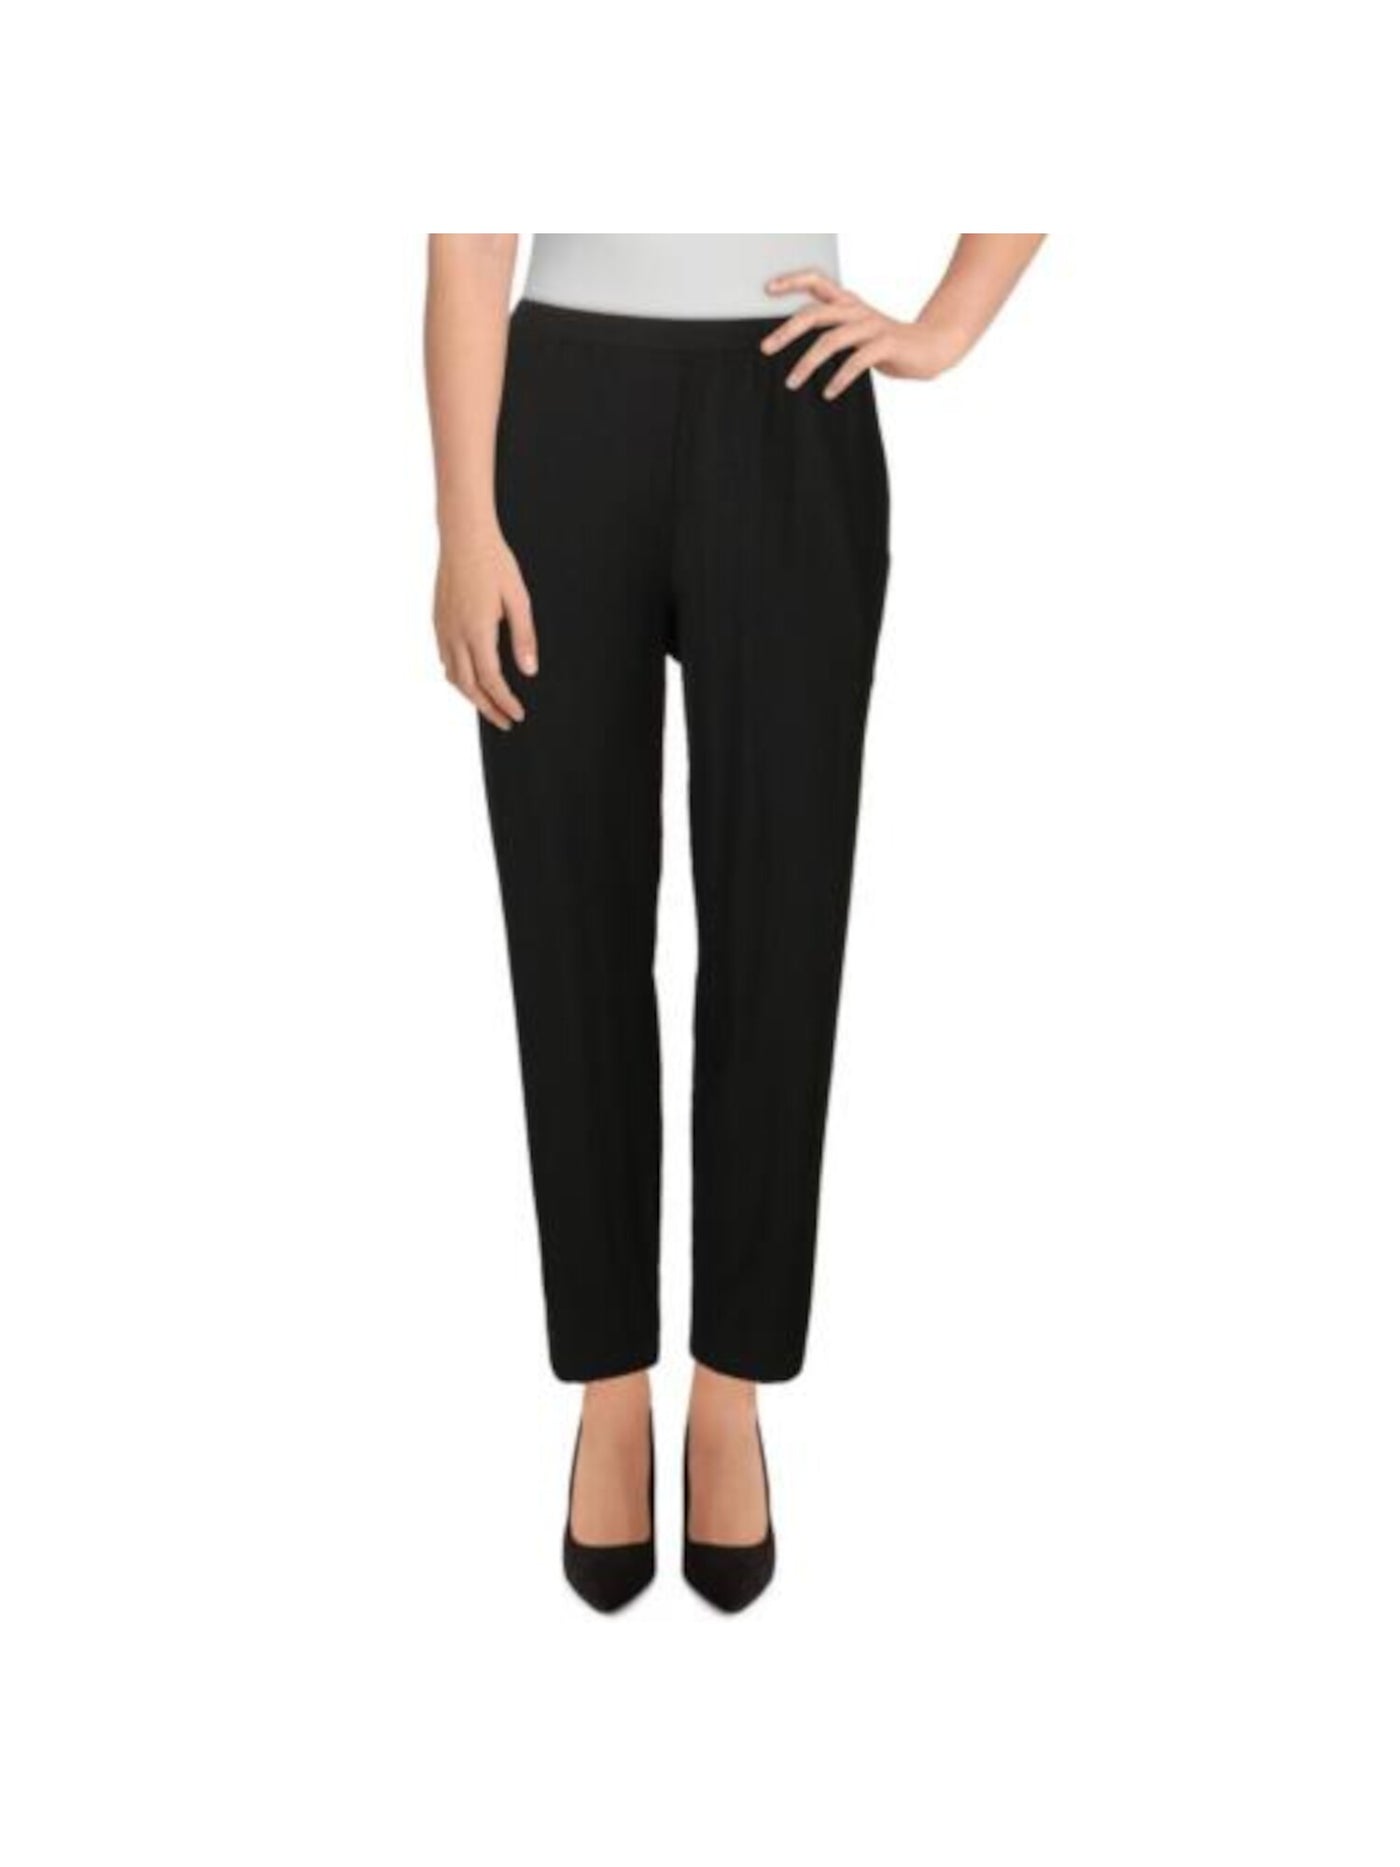 EILEEN FISHER Womens Black Stretch Zippered Tapered Ankle Pants Wear To Work Pants M